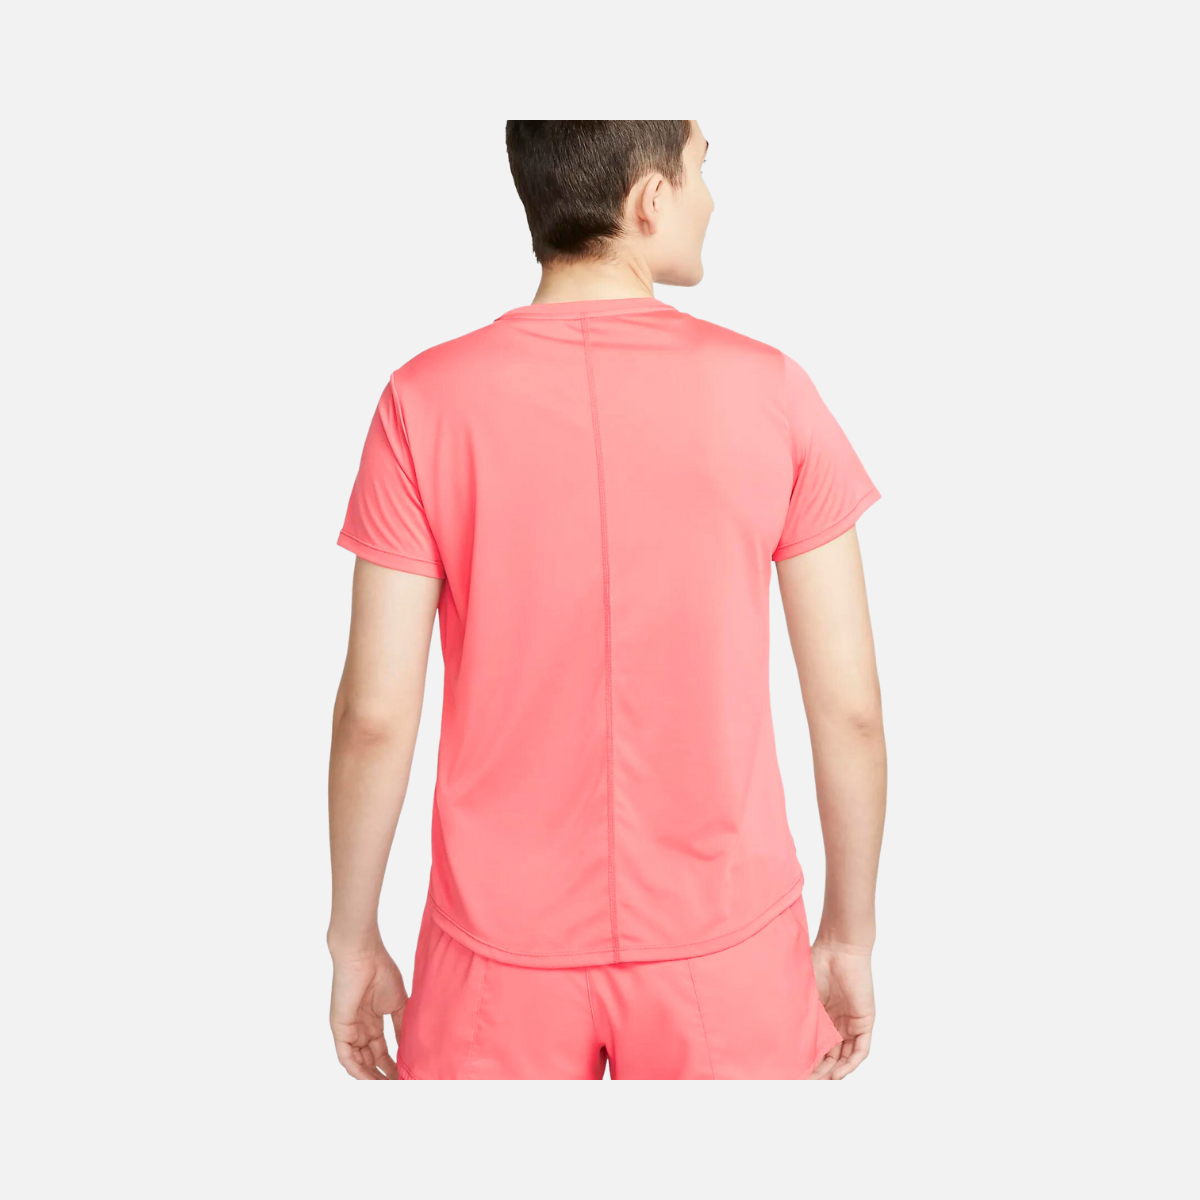 Nike Dri-Fit One Women's Standard-Fit Short-Sleeve Top-Sea Coral/White